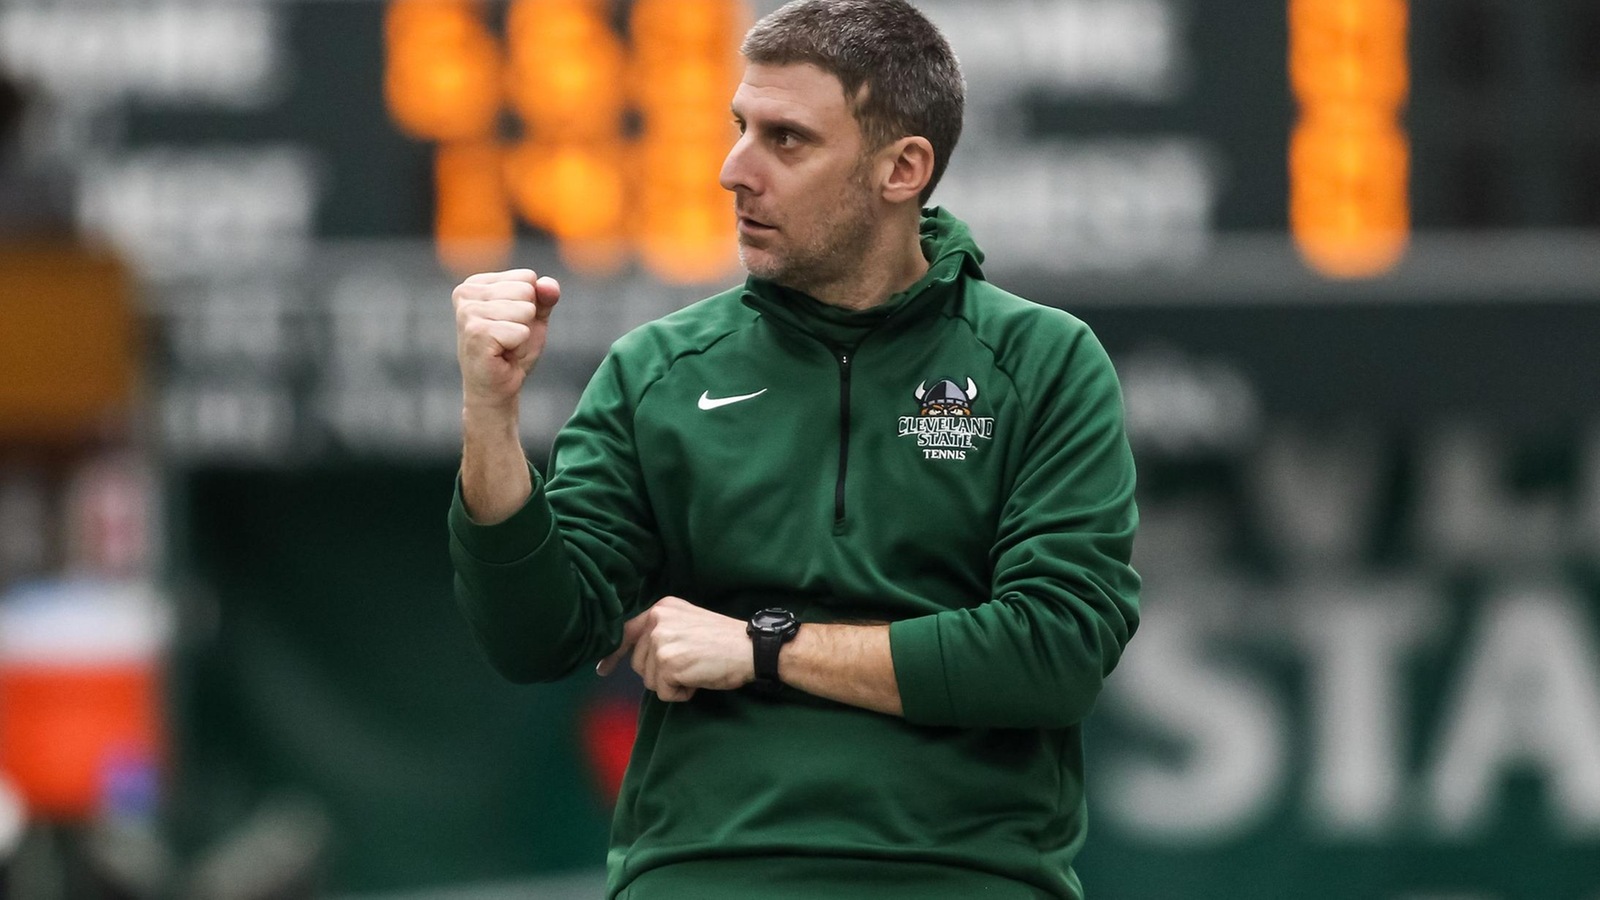 Brian Etzkin Records 300th Career Win With Cleveland State Men’s Tennis